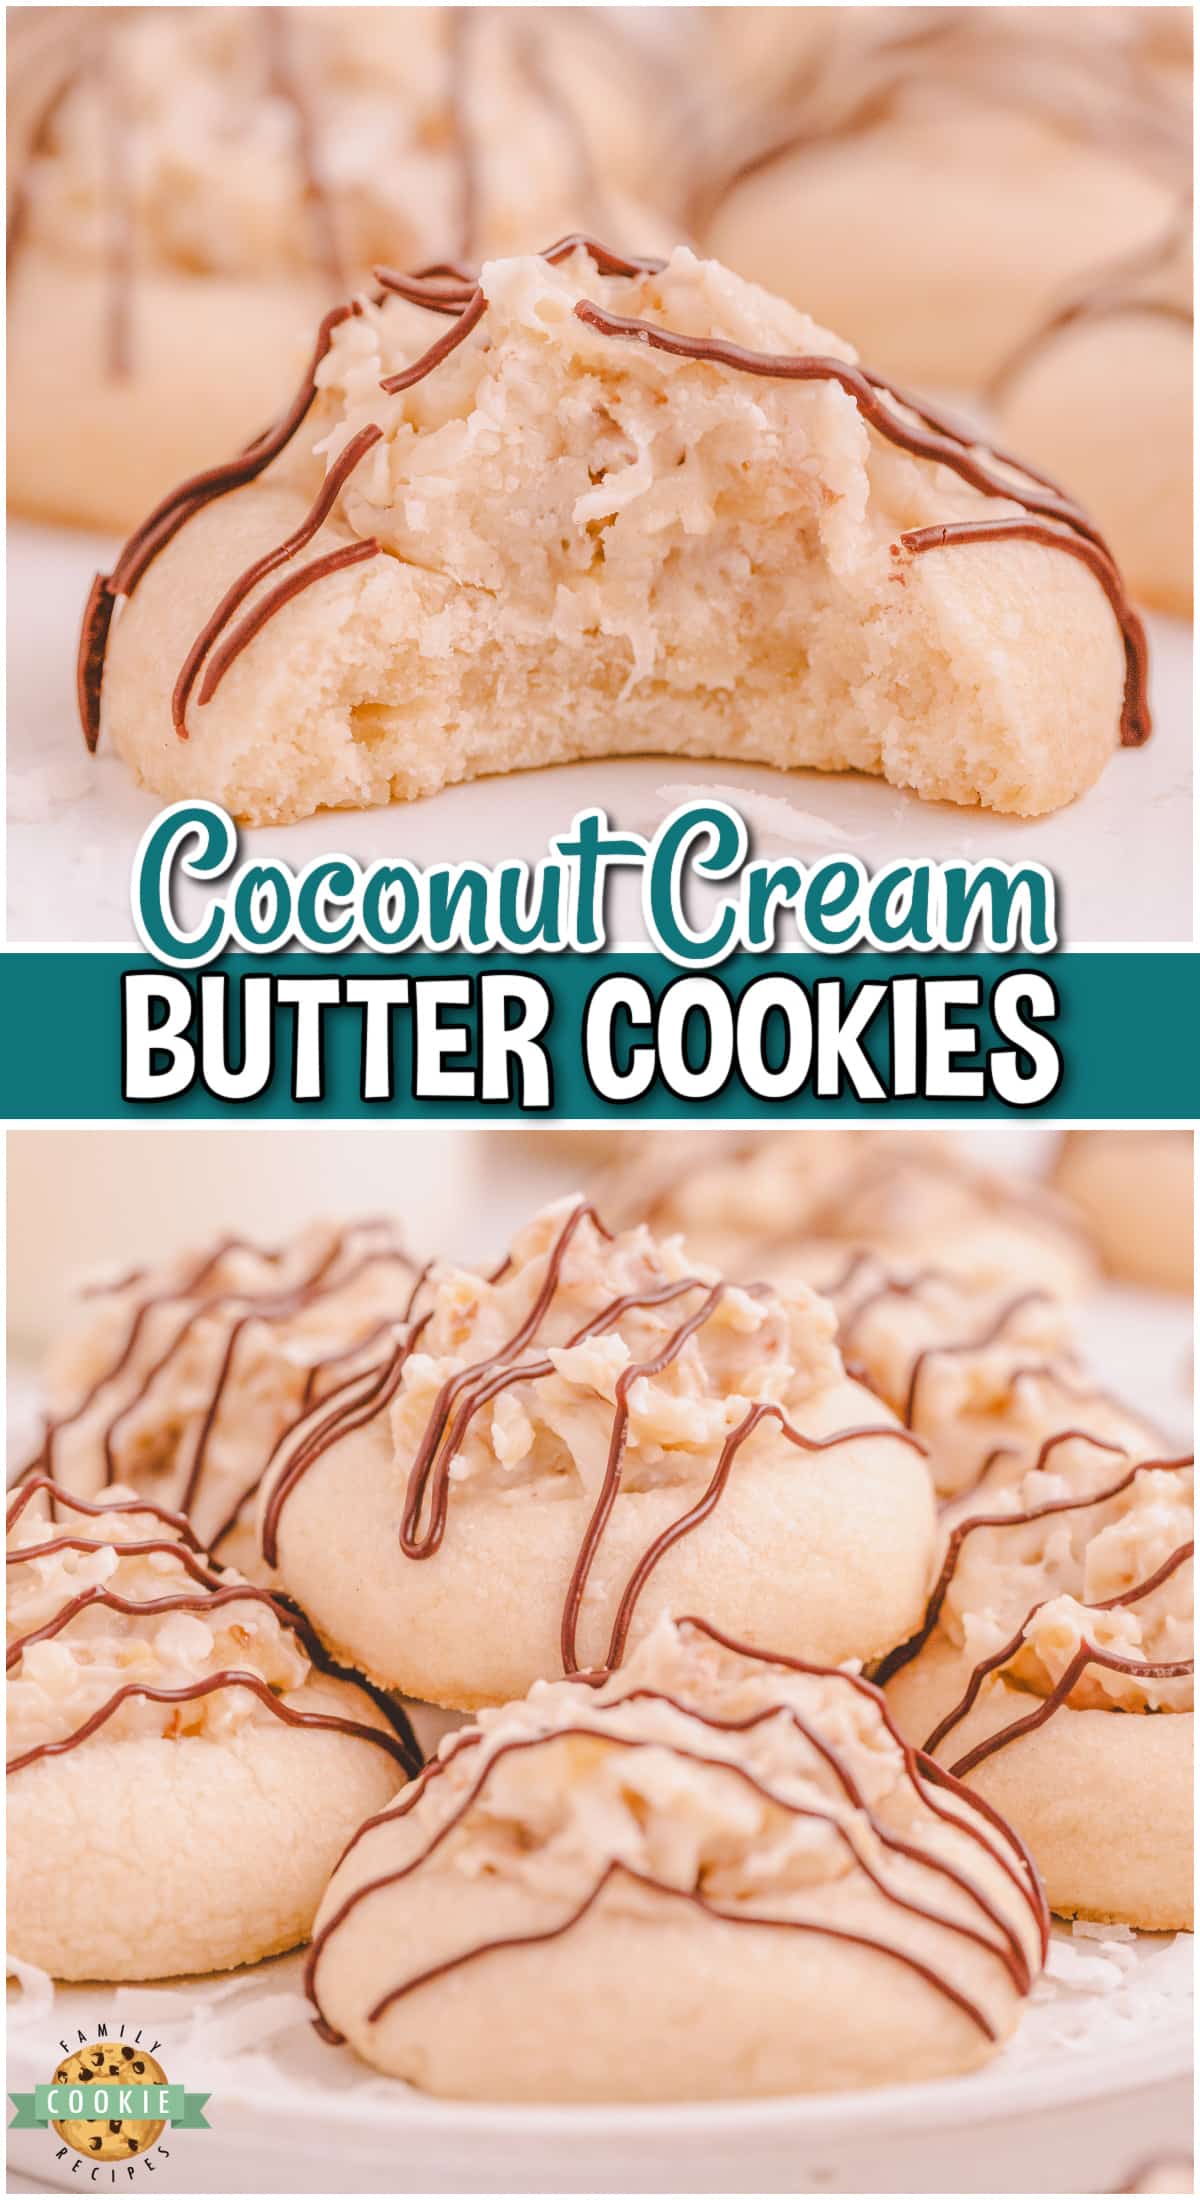 Coconut Cream Cookies are buttery sugar cookies topped with a cream cheese coconut frosting, then drizzled with melted chocolate!